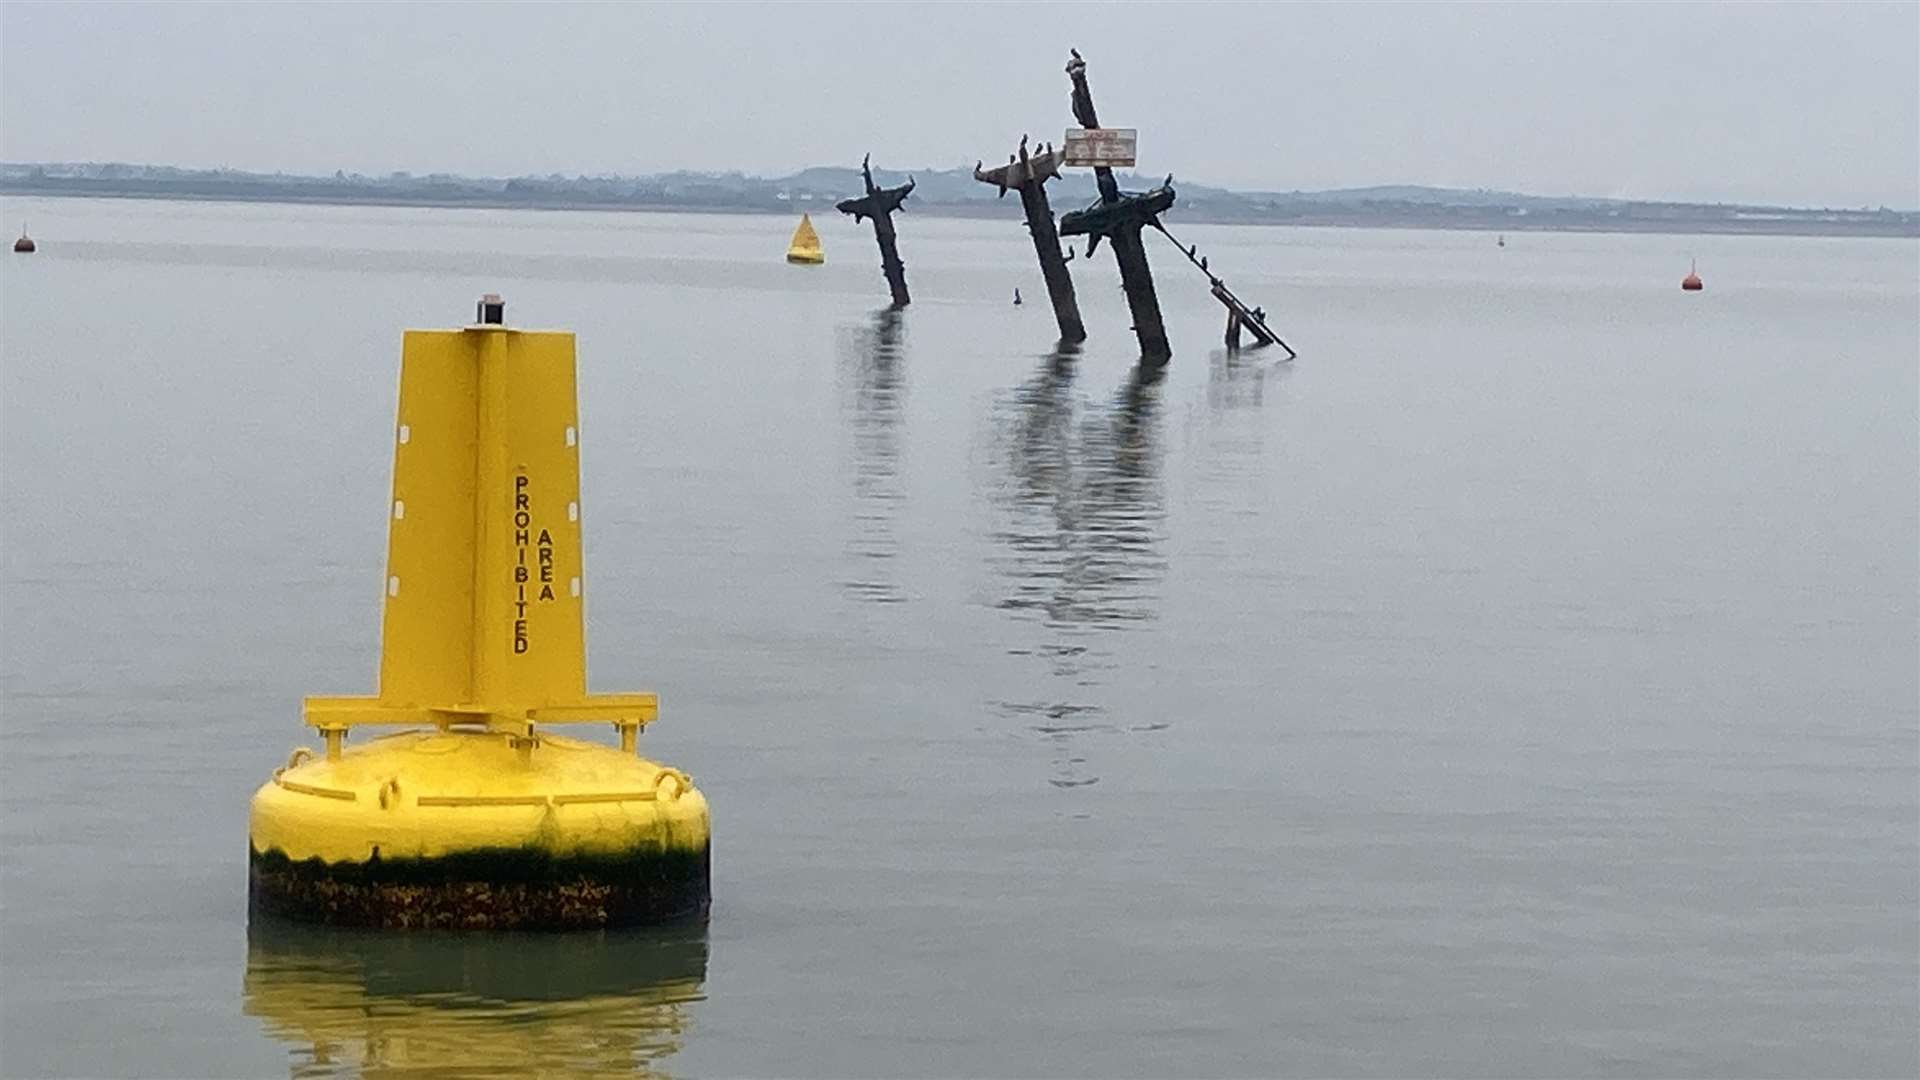 The ghostly masts and yellow marker buoy of Sheppey bomb ship SS Richard Montgomery as seen from the X-Pilot